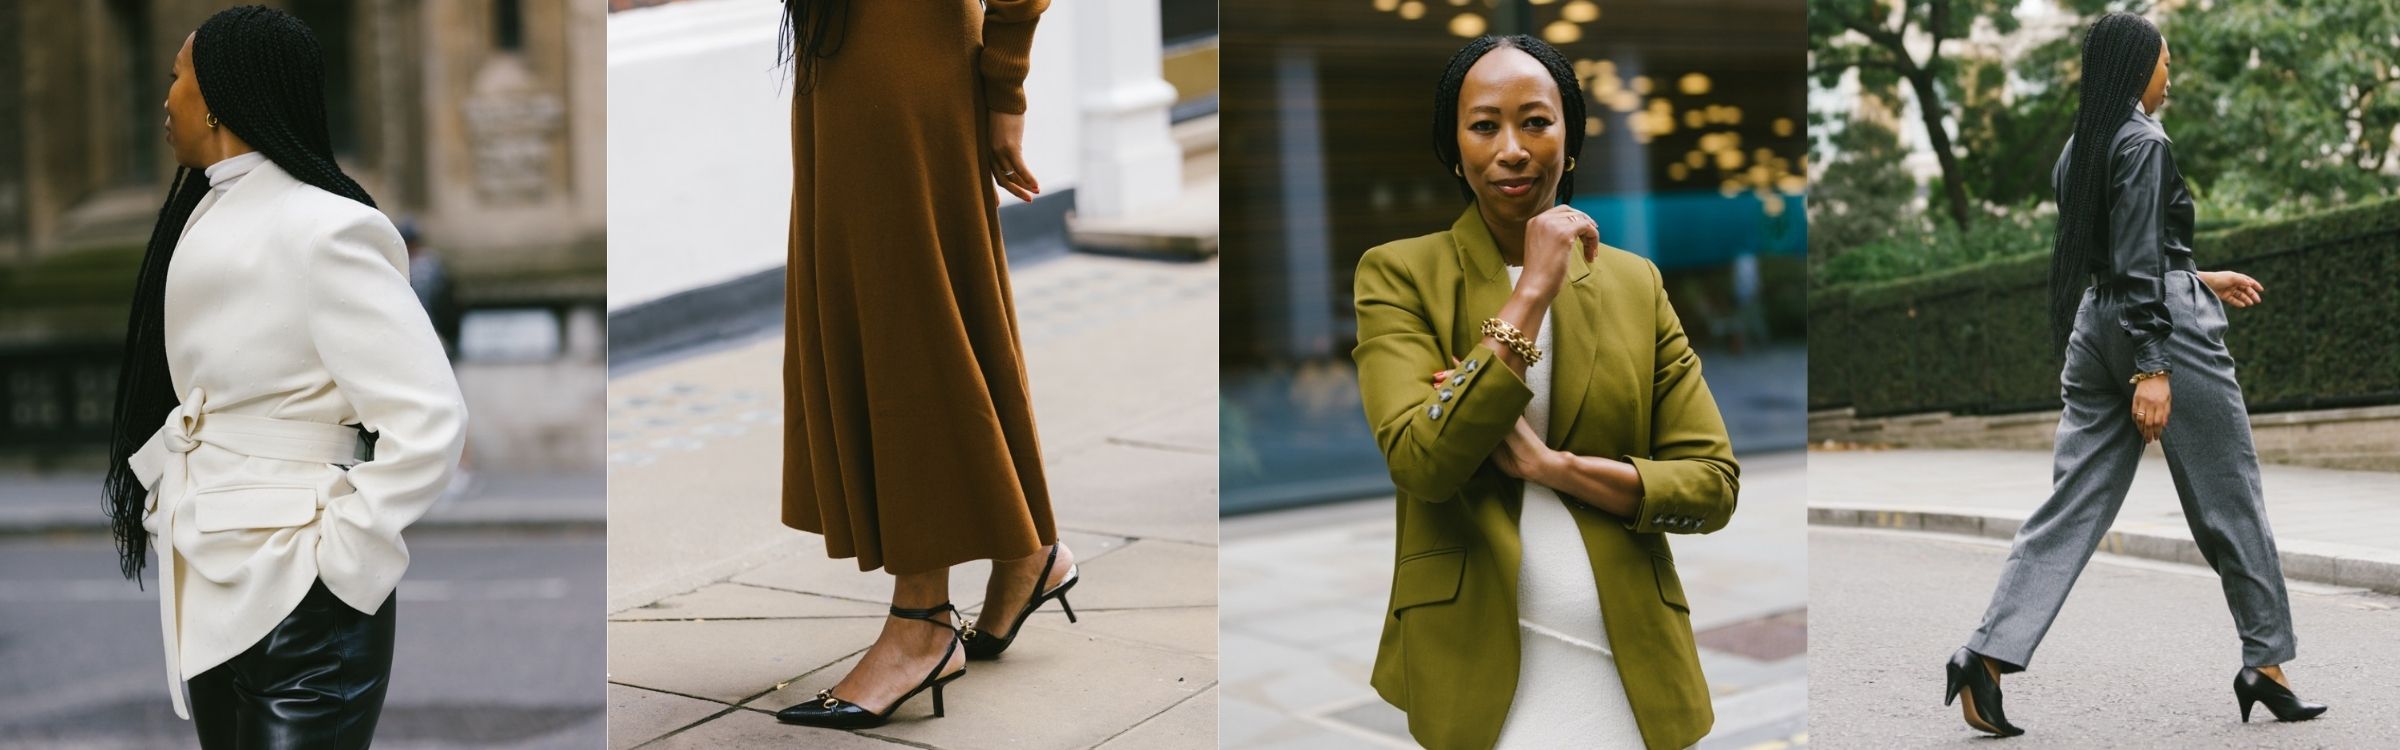 I'm a Lawyer in the City—Here's How I Built a Capsule Wardrobe for the Office